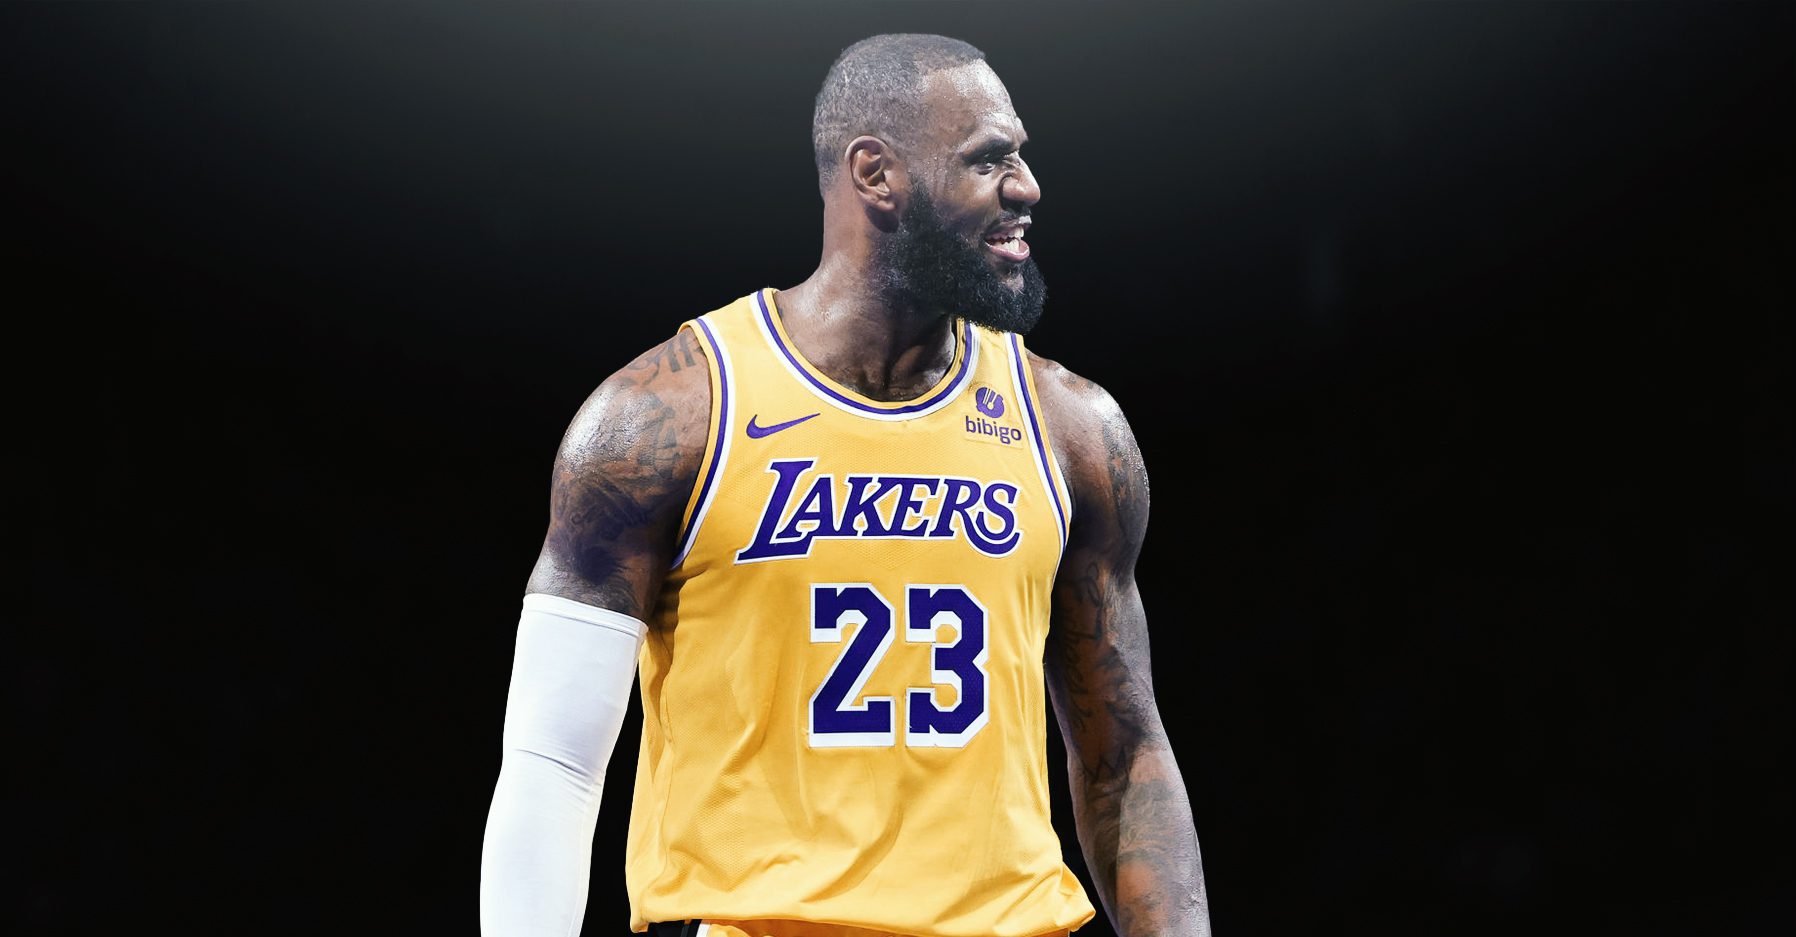 NBA World Reacts to LeBron’s Big Game vs Pelicans, Lakers Still Losing